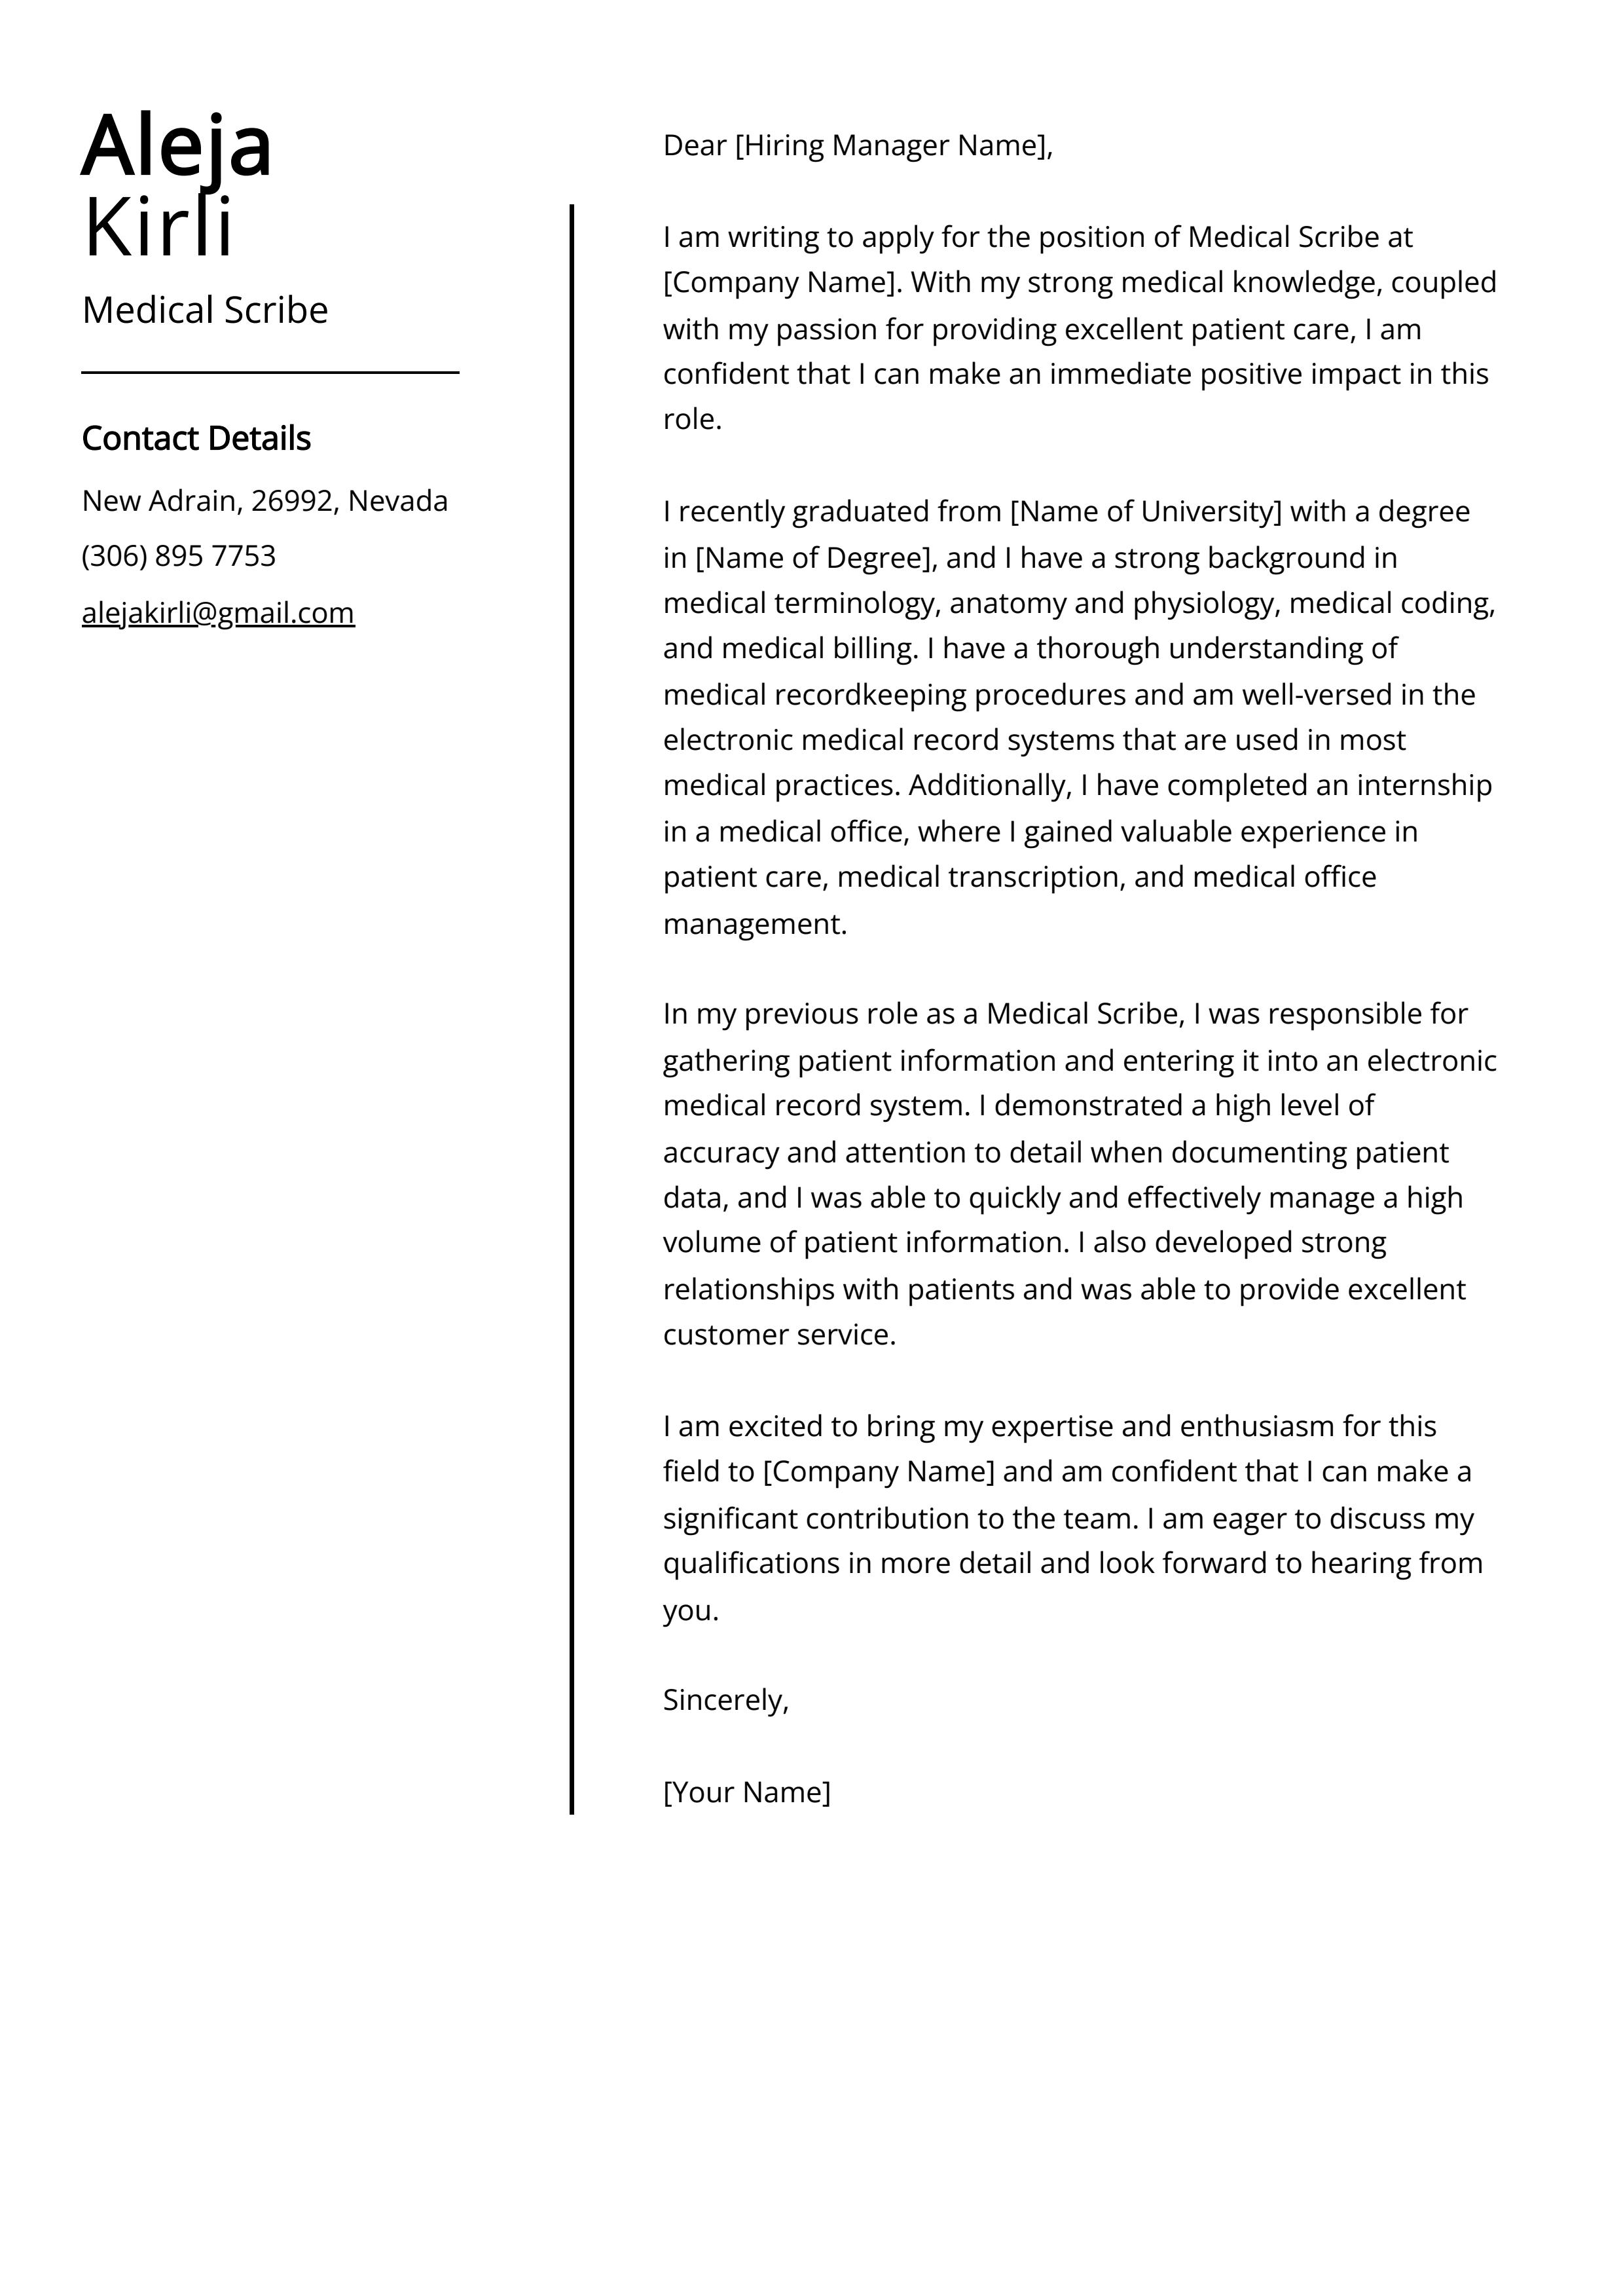 Medical Scribe Cover Letter Example